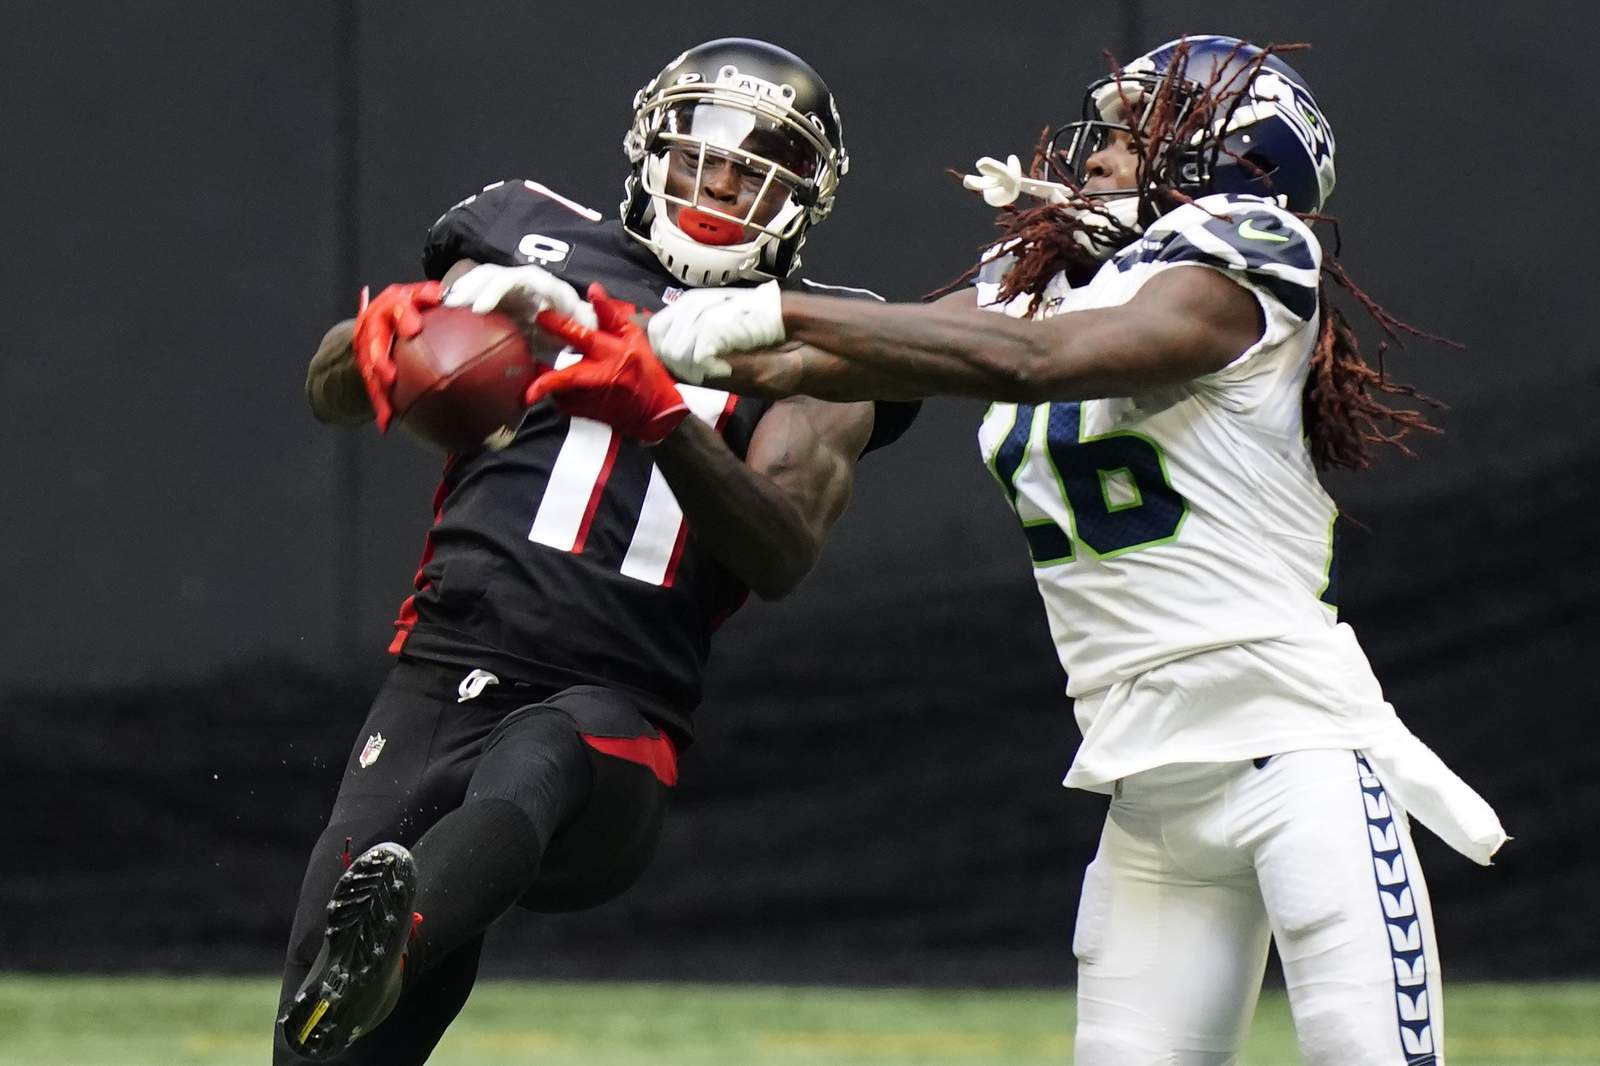 Shaquill Griffin agrees to join Jaguars, AP reports